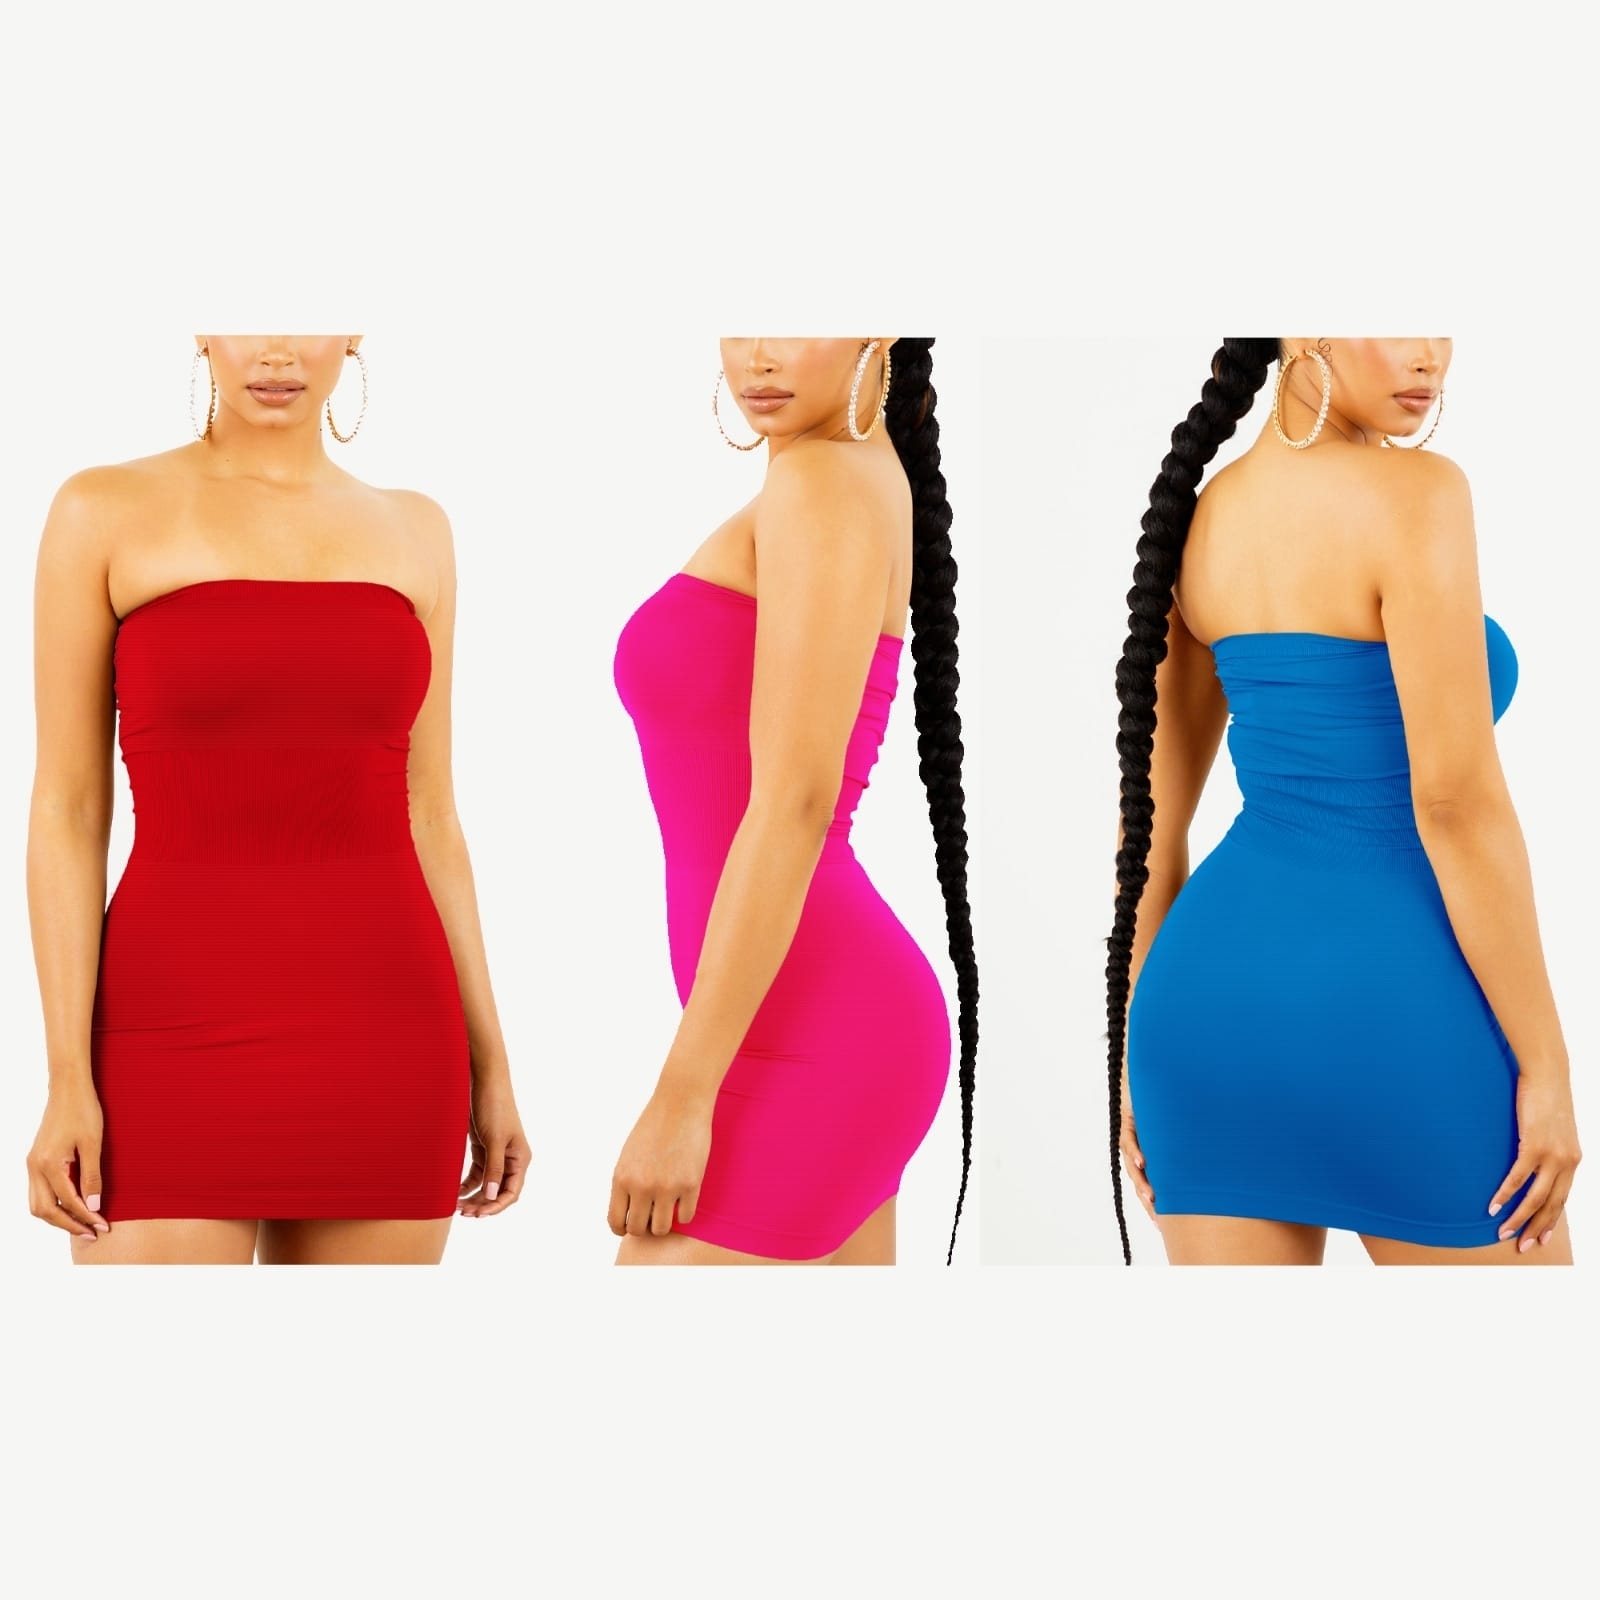 3-Pack Women's Strapless Stretchy Seamless Tight Fit Body Con Mini Tube Top Dress - BLUE, L